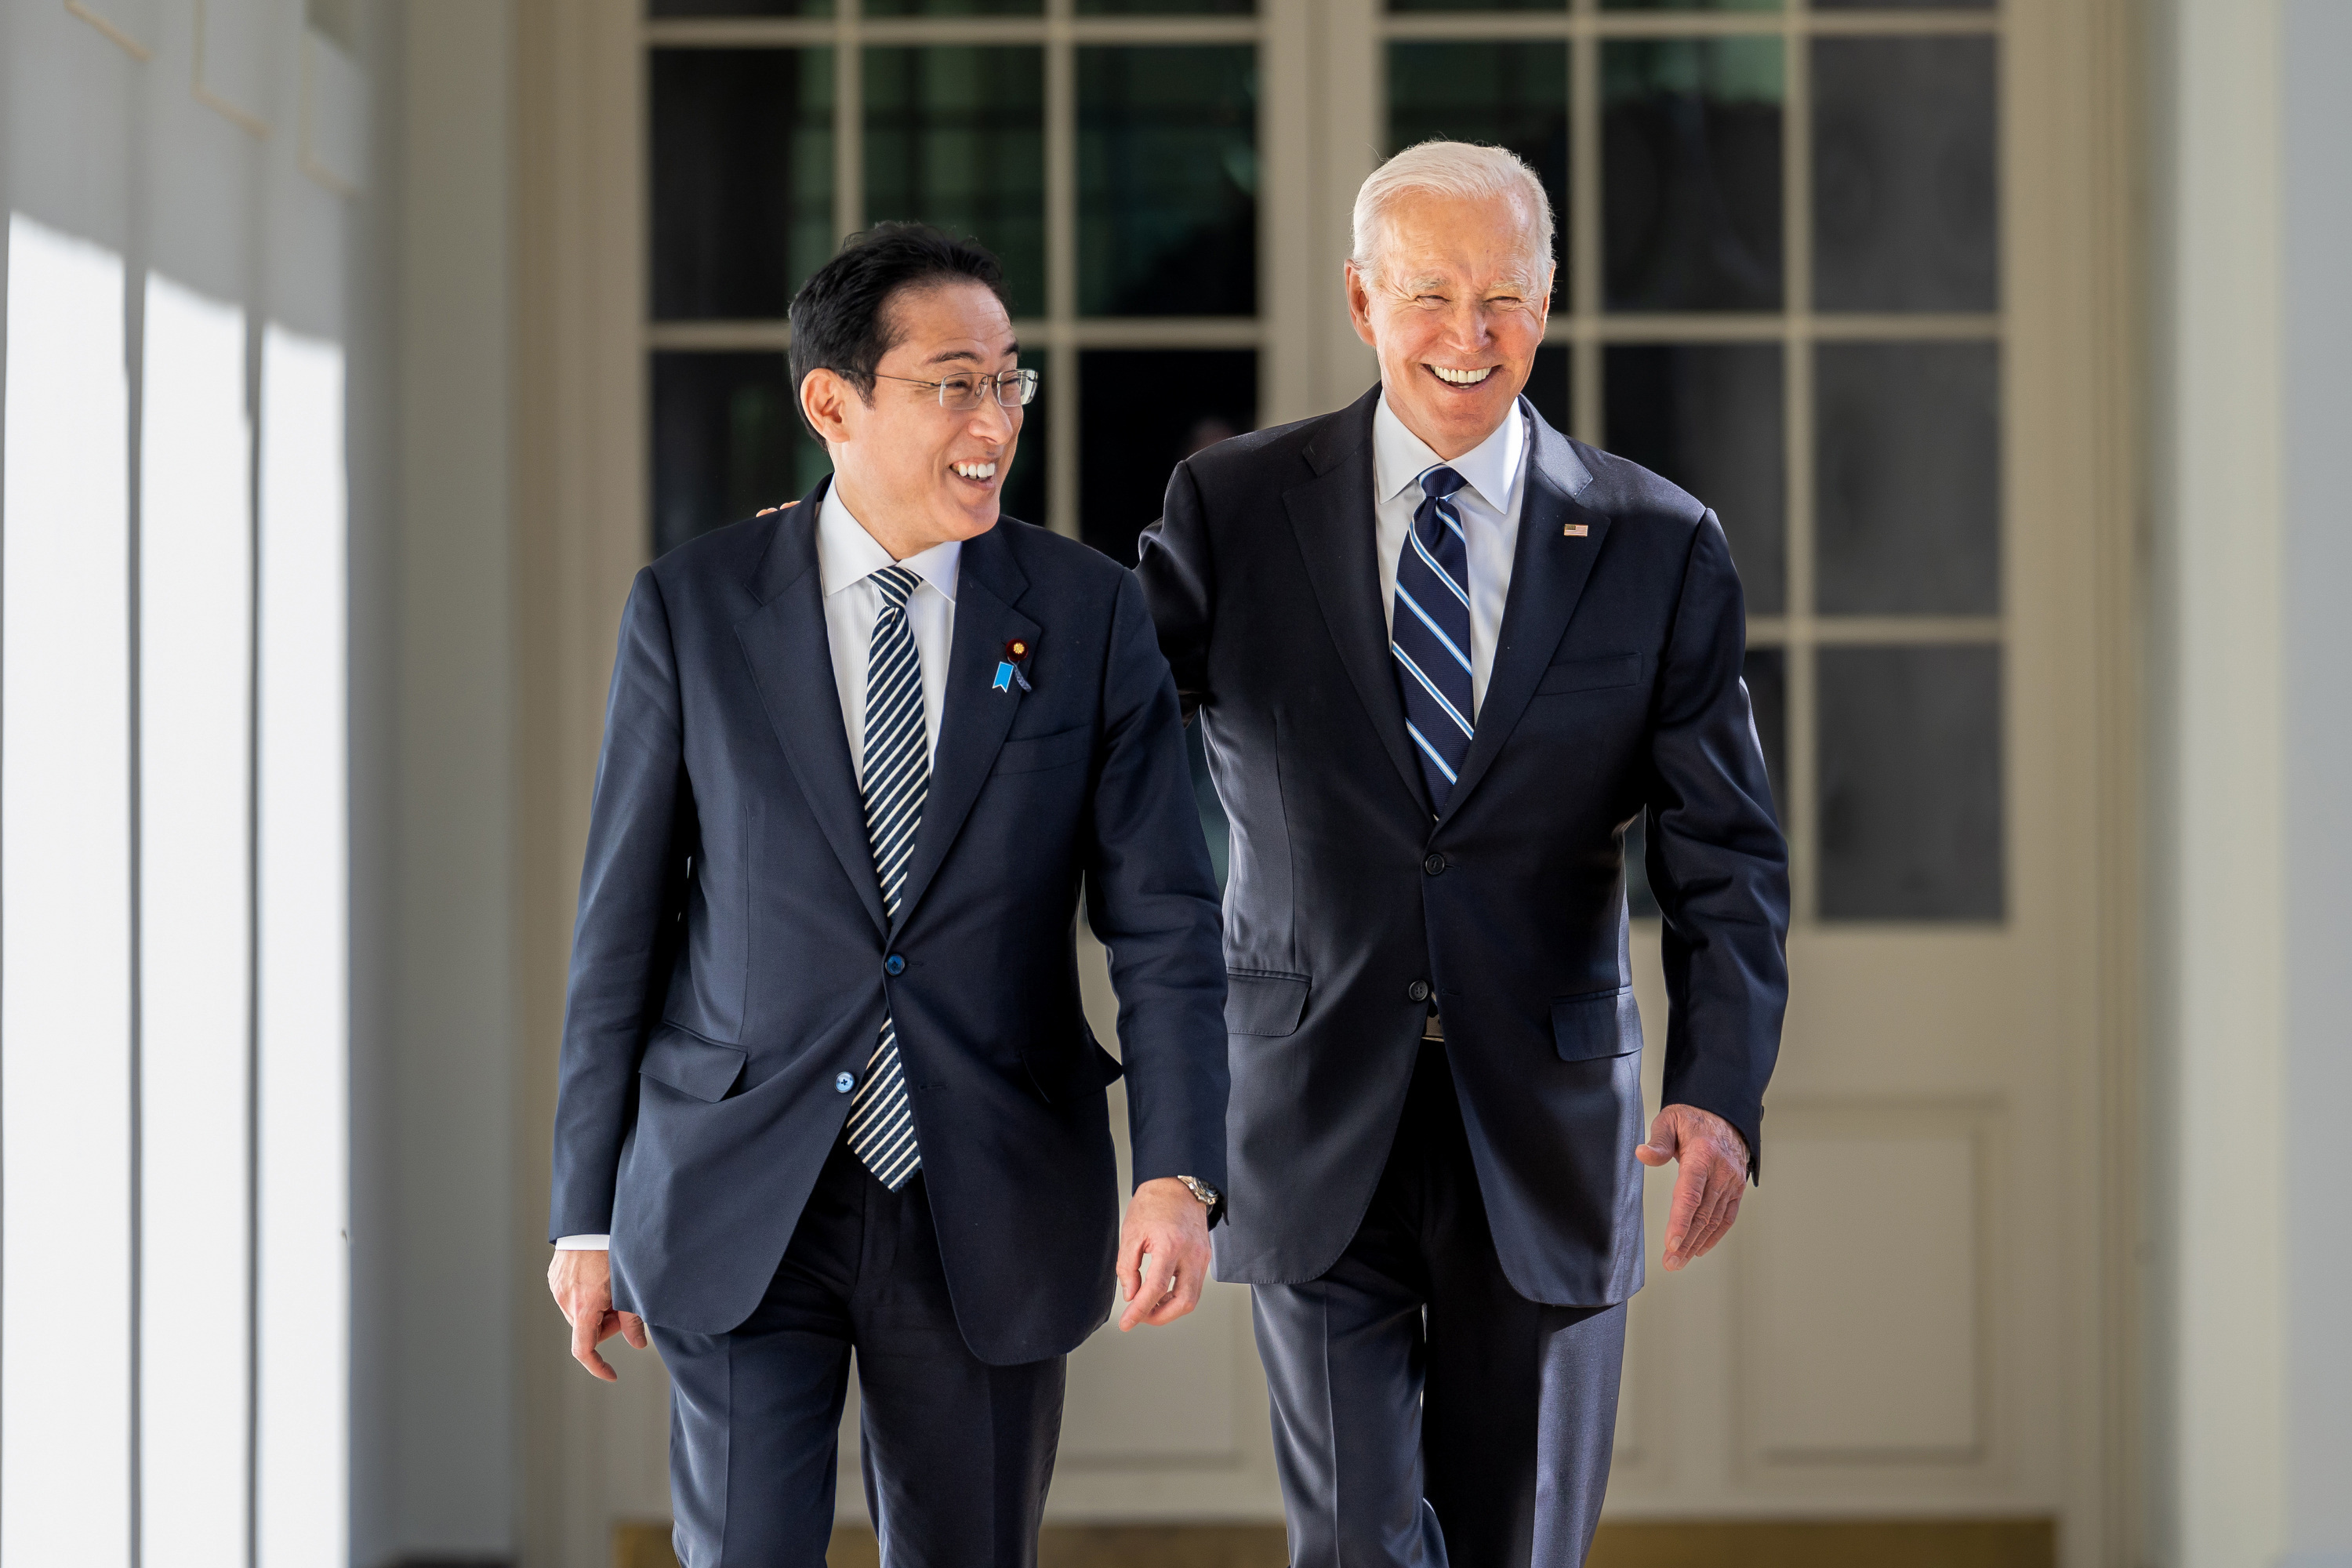 President Biden on X: "Prime Minister Kishida of Japan has been a steadfast ally and friend to the United States. It was my pleasure to sit down with him and discuss how